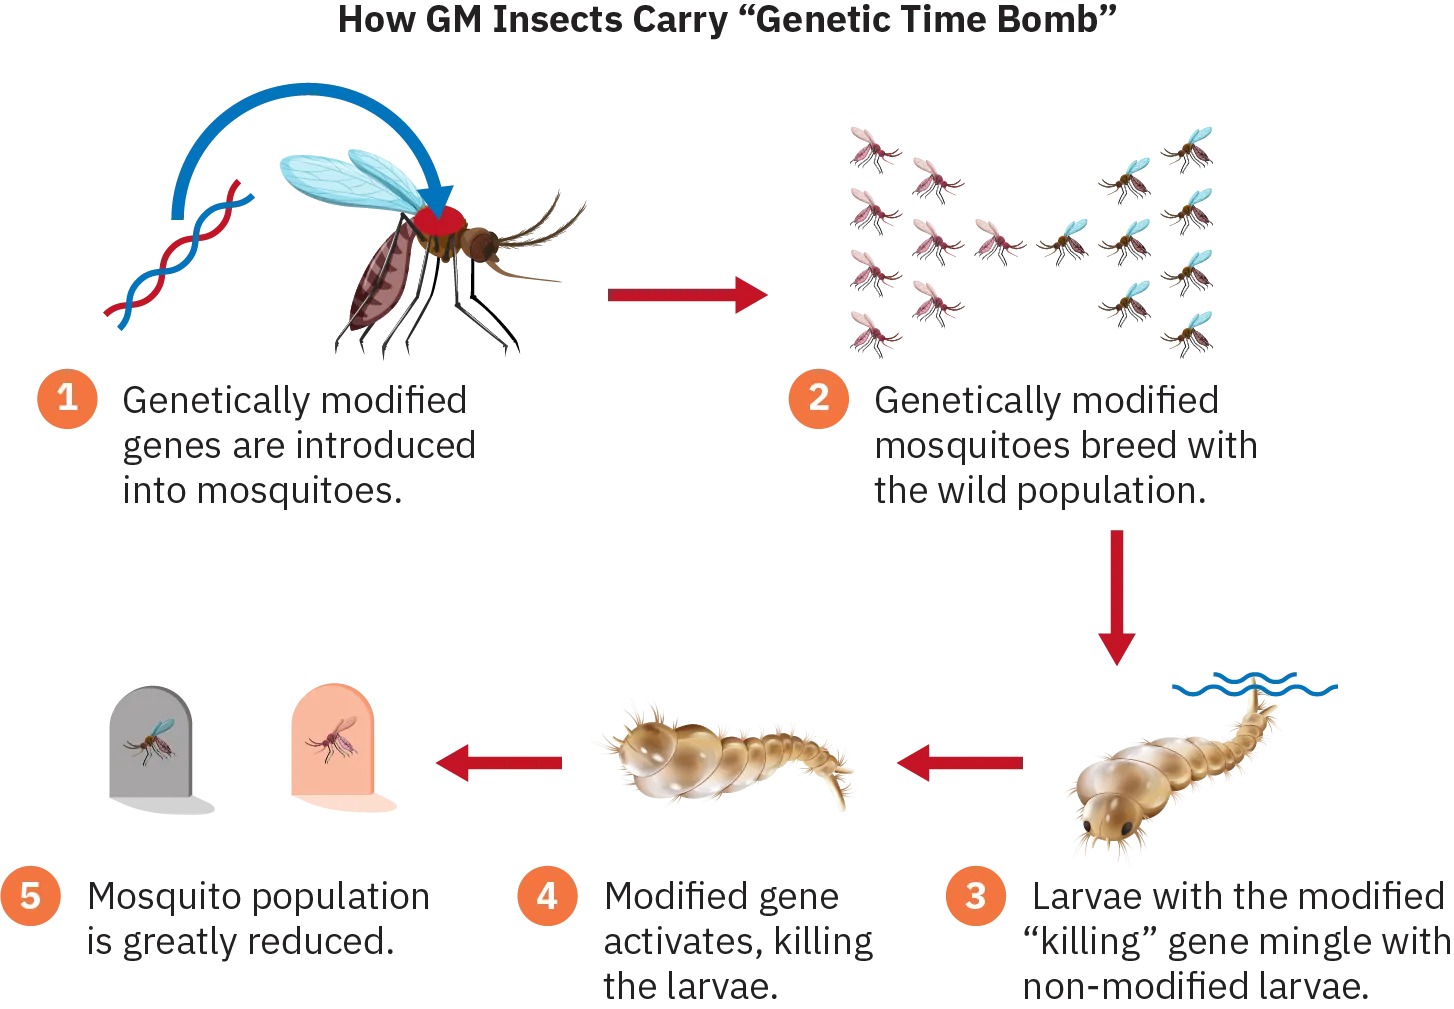 Infographic depicting the following steps: 1) Genetically modified genes are introduced into mosquitoes. 2) Genetically modified mosquitoes breed with wild population. 3) Larvae with the modified “killing” gene mingle with non-modified larvae. 4) Modified gene activates, killing the larvae. 5) Mosquito population is greatly reduced.